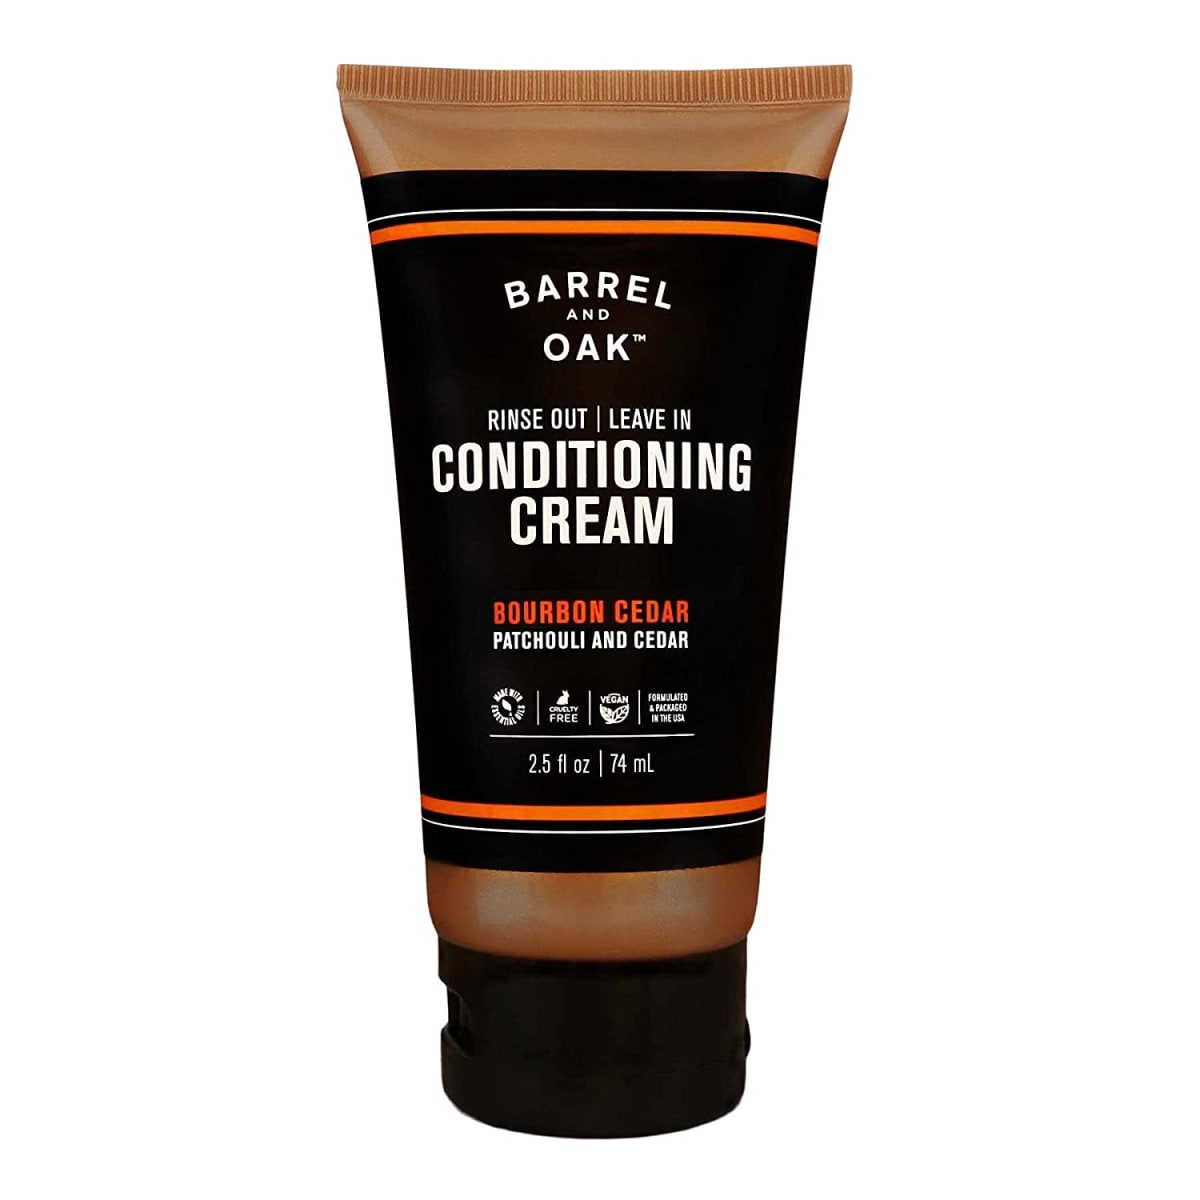 Barrel and Oak - Rinse Out Leave In Conditioning Cream